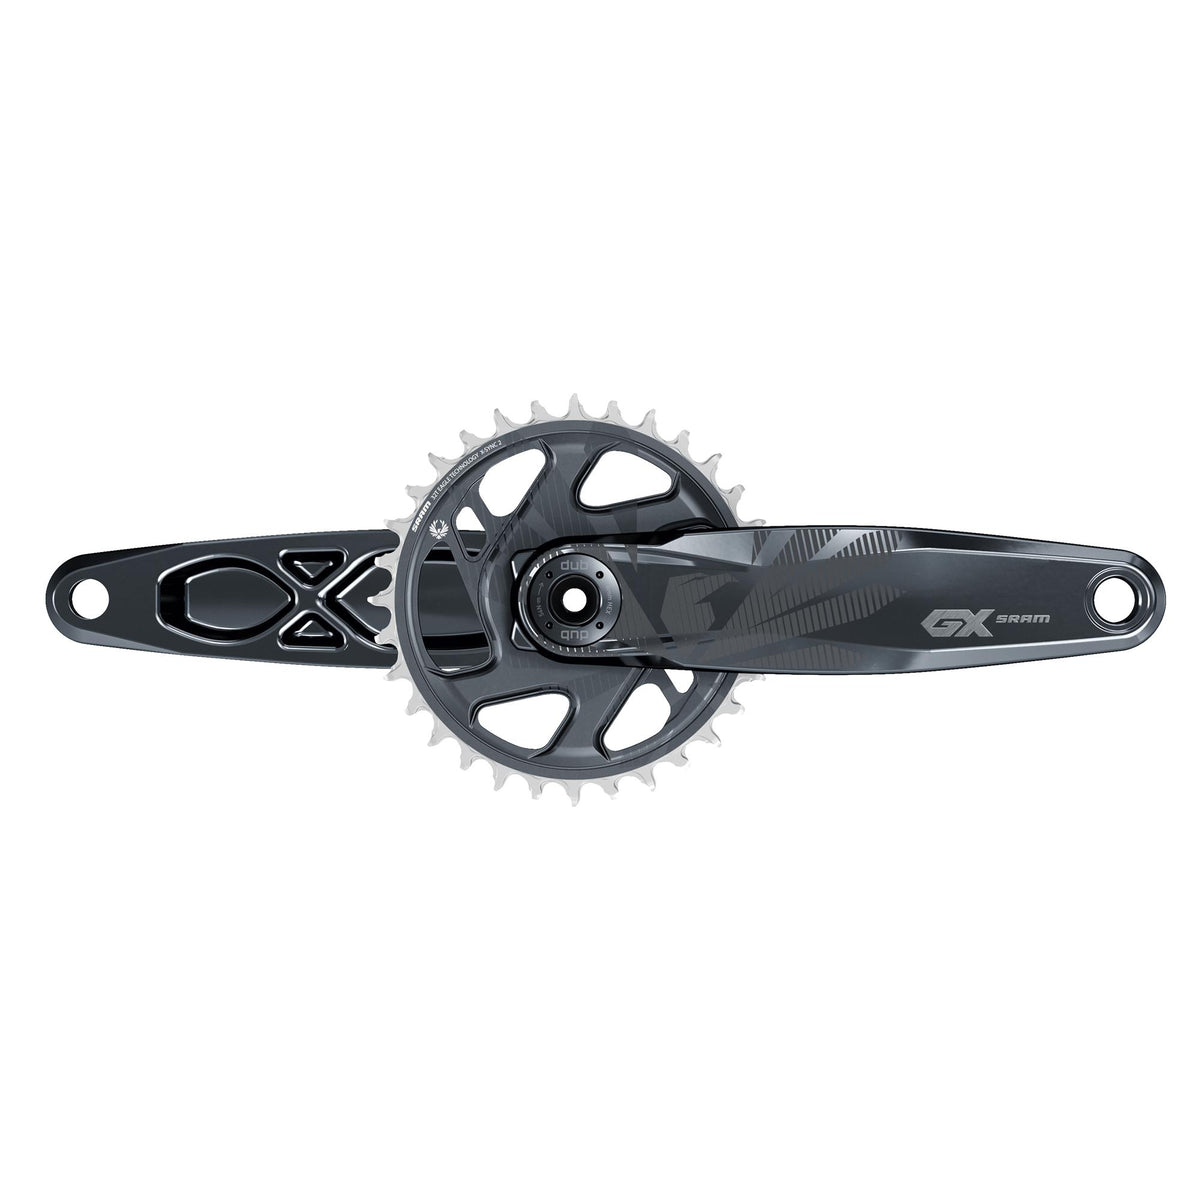 SRAM Crank Gx Eagle Fat Bike 5" Dub 12S With Direct Mount 30T X-Sync 2 Cnc Chainring (Dub Cups/Bearings Not Included)